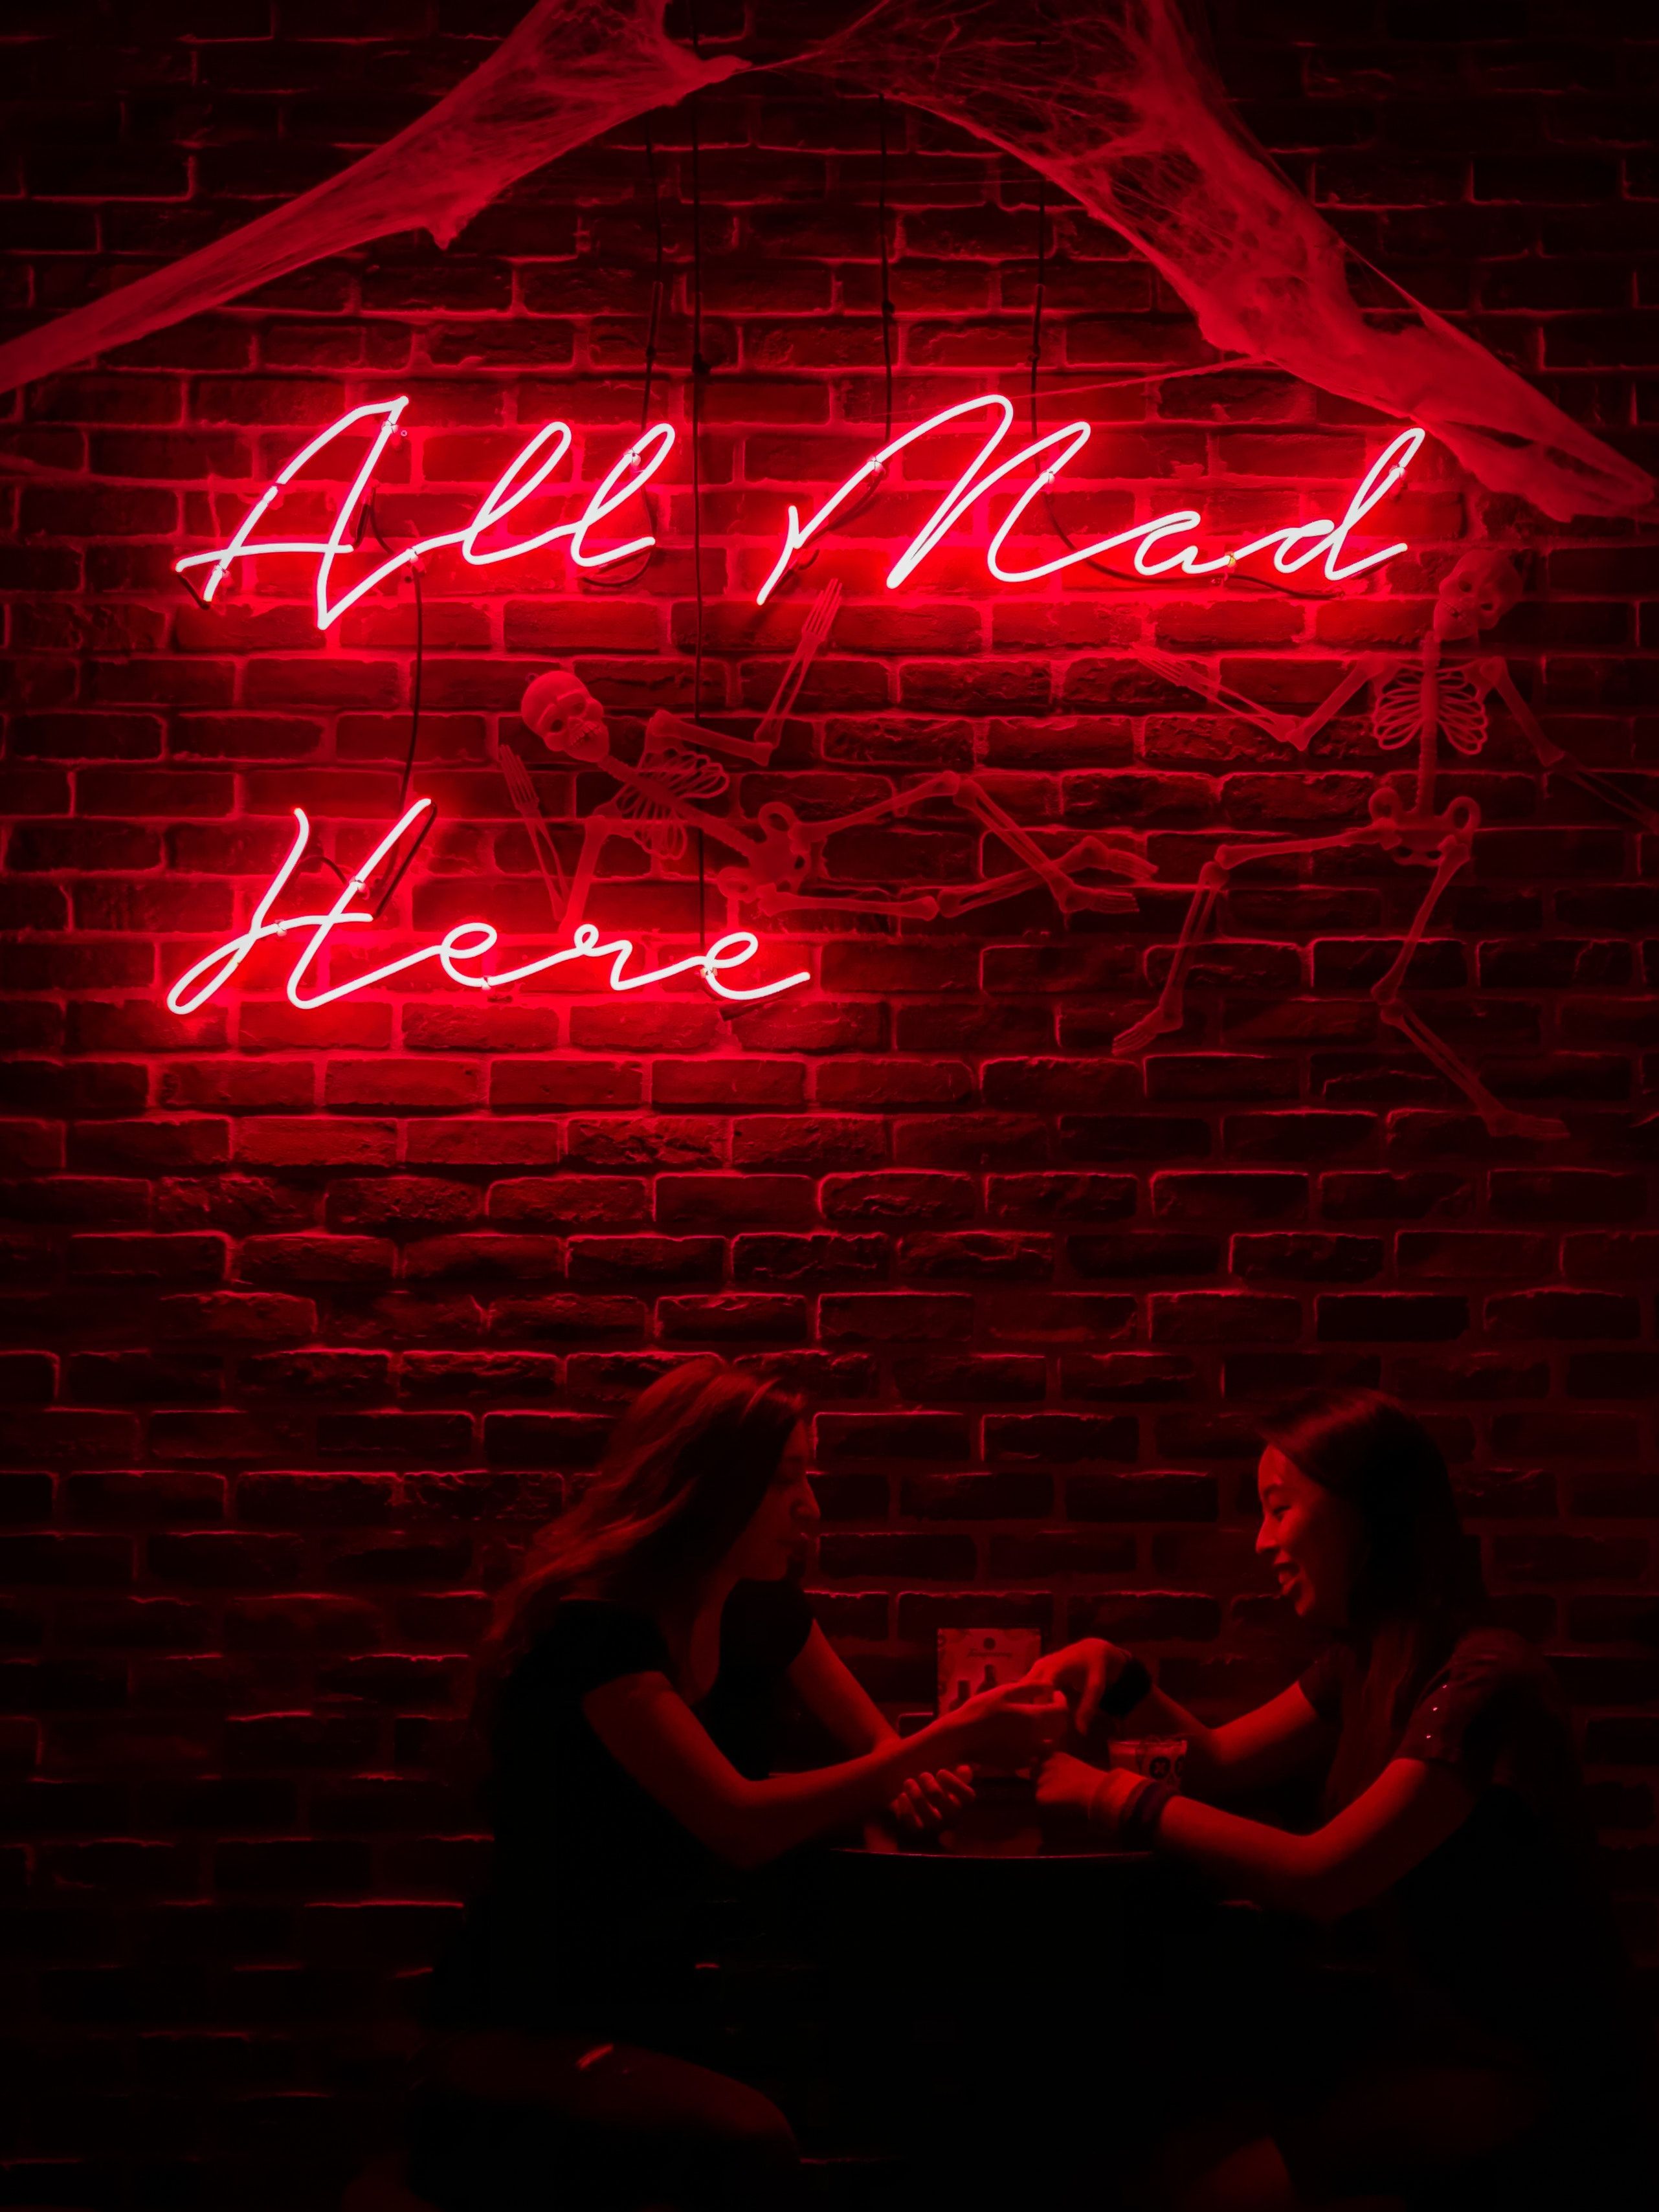 A couple of women sitting at the table - Black, red, sad, dark red, creepy, iPhone red, light red, dark phone, neon red